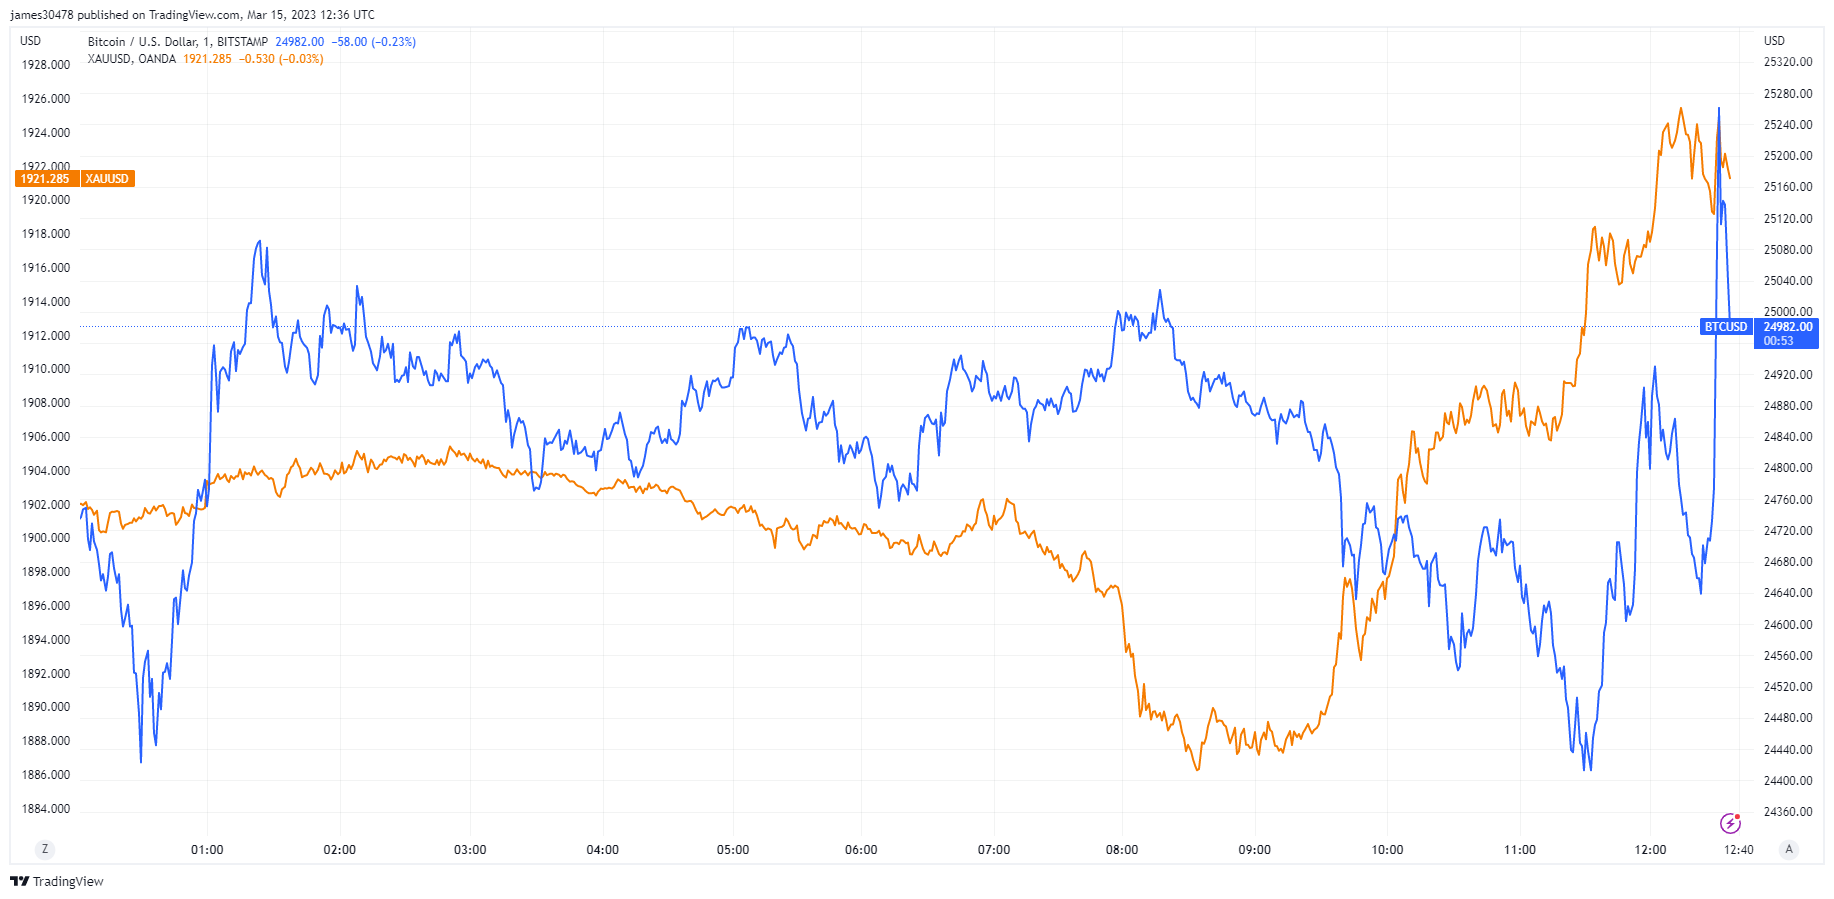 BTC and Gold: (Source: Trading View)